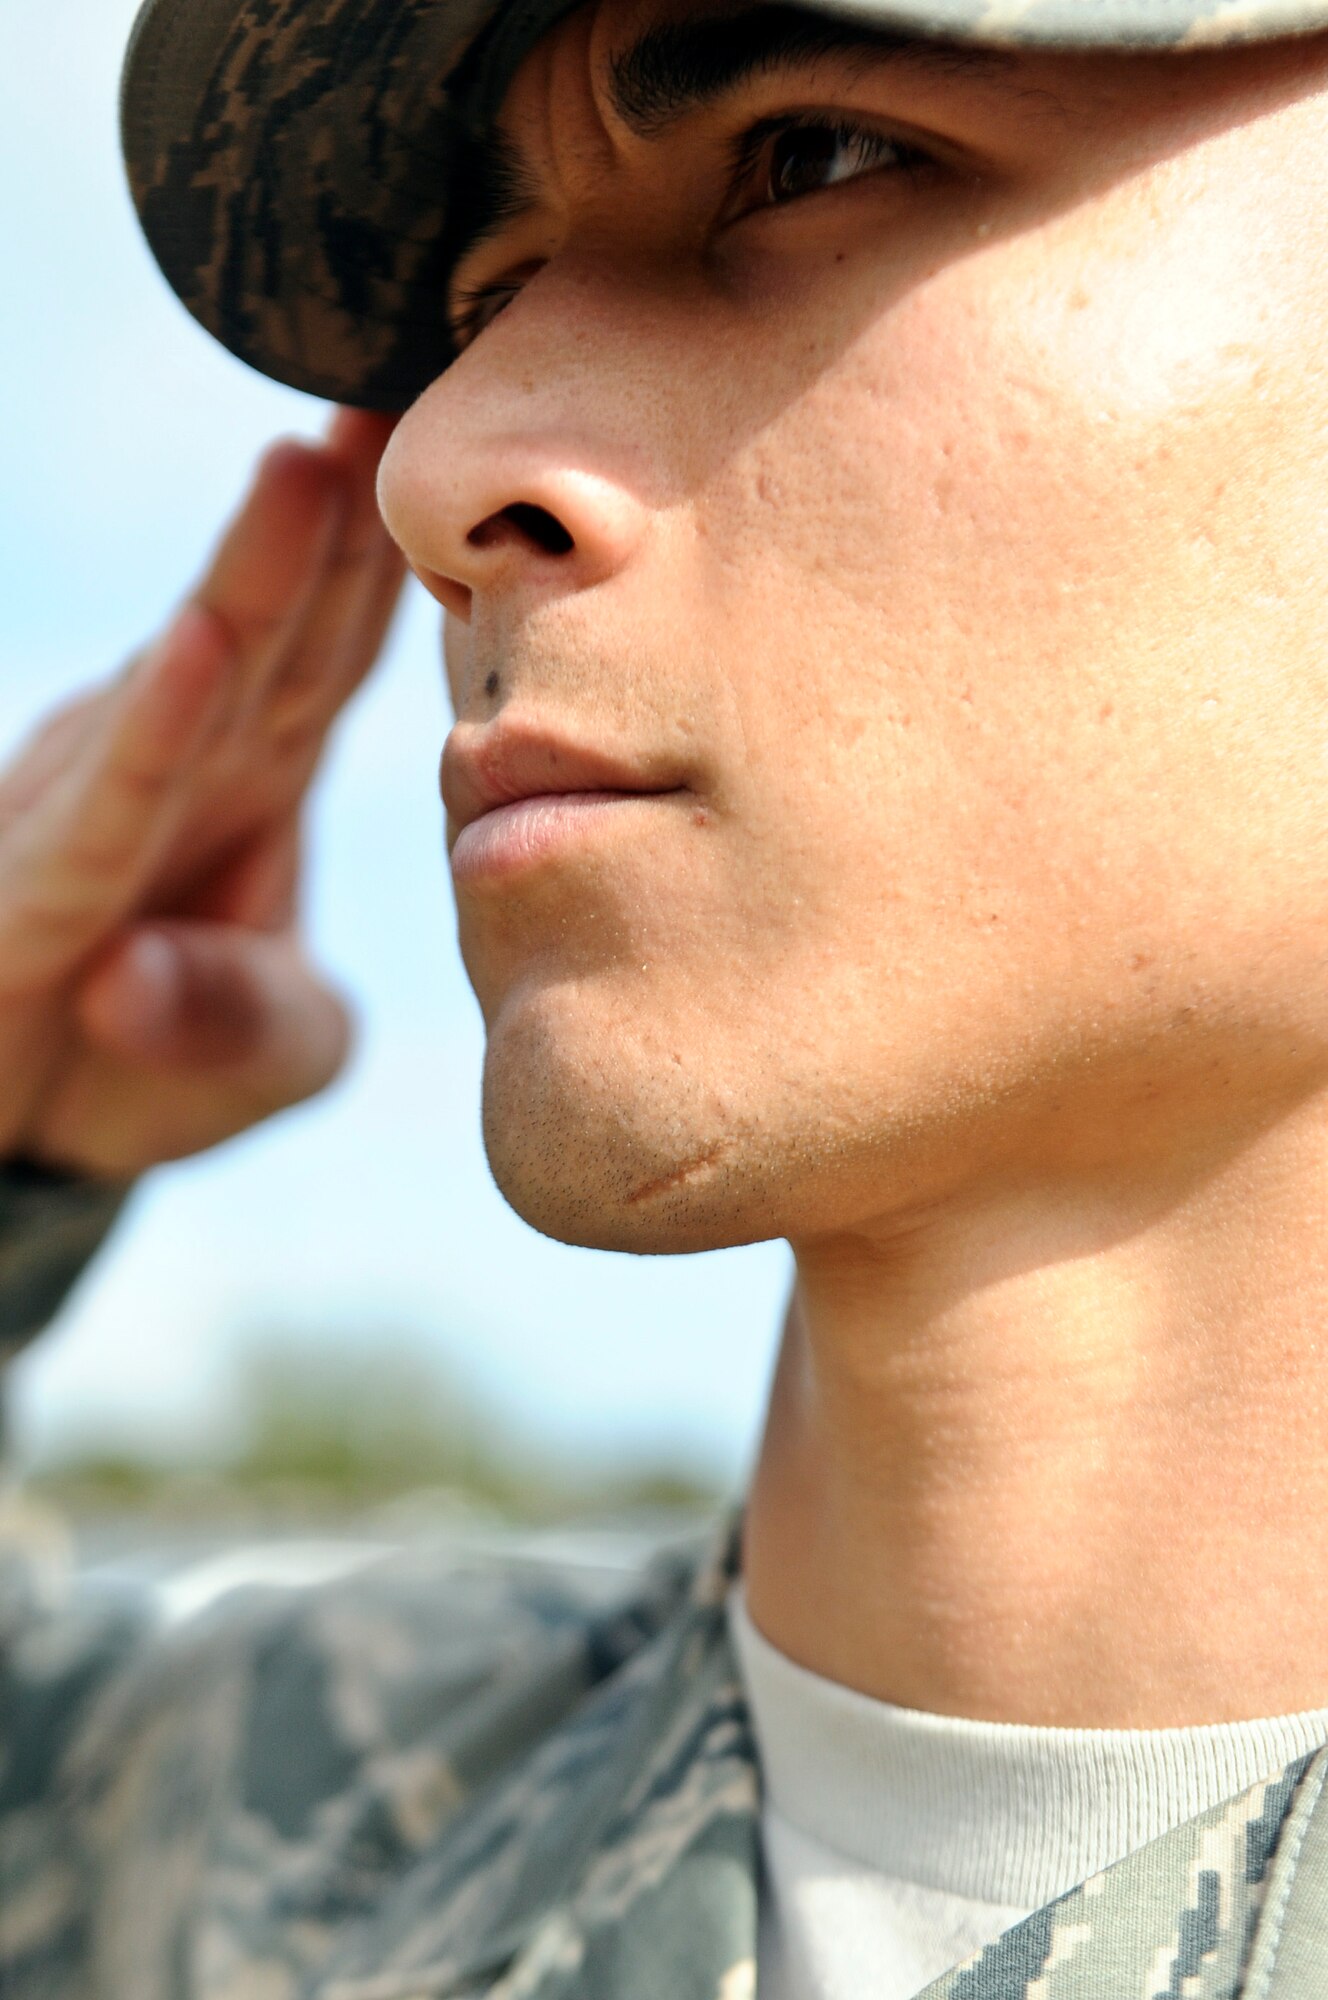 Senior Airman Shokhrukh Dadajanov, Hurlburt Field honor guardsman, renders a salute during a retreat ceremony on Hurlburt Field, Fla., Feb. 10, 2014. Military members in uniform should assume the position of attention and salute when the national anthem plays. (U.S. Air Force photo/Senior Airman Michelle Vickers)